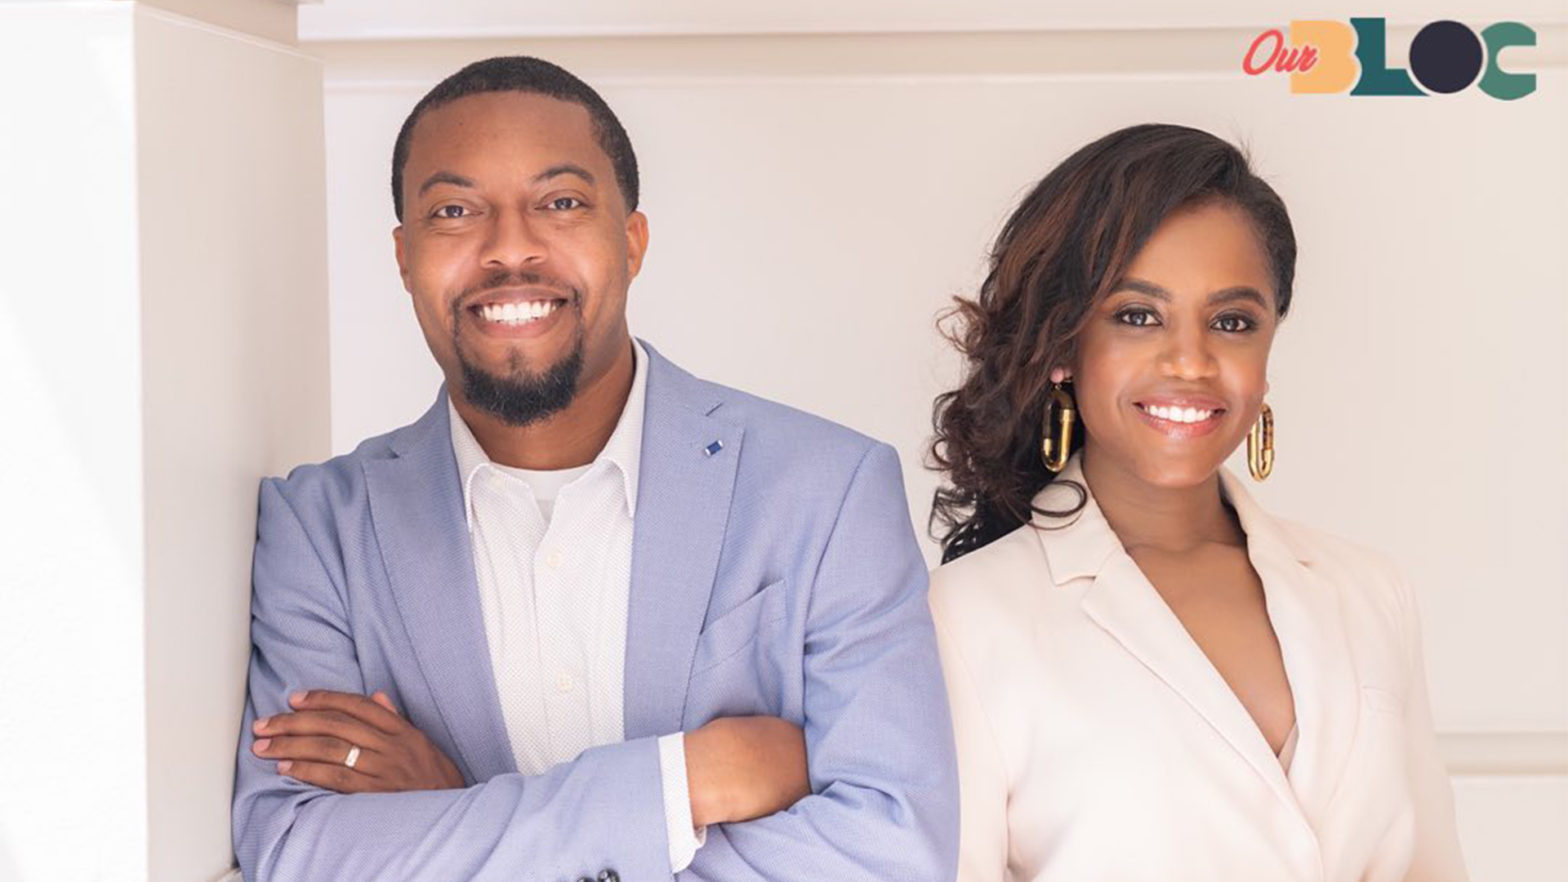 Sweethearts Turned Founders Launch Online Platform To Diversity The Event Planning Industry